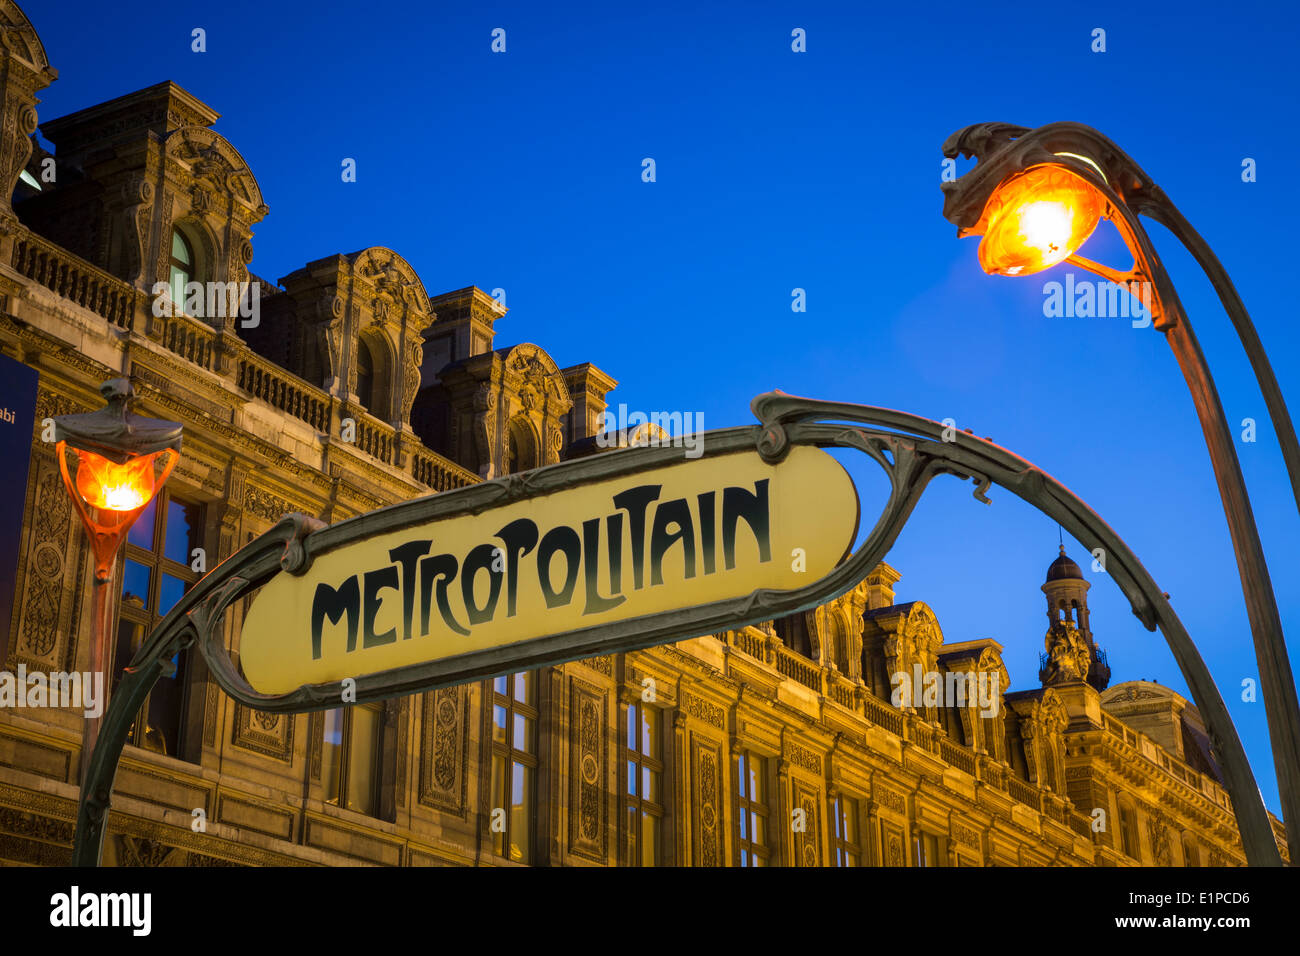 Metro sign and lights at Palais Royal/Musee du Louvre Metro stop with Musee du Louvre beyond, Paris France Stock Photo